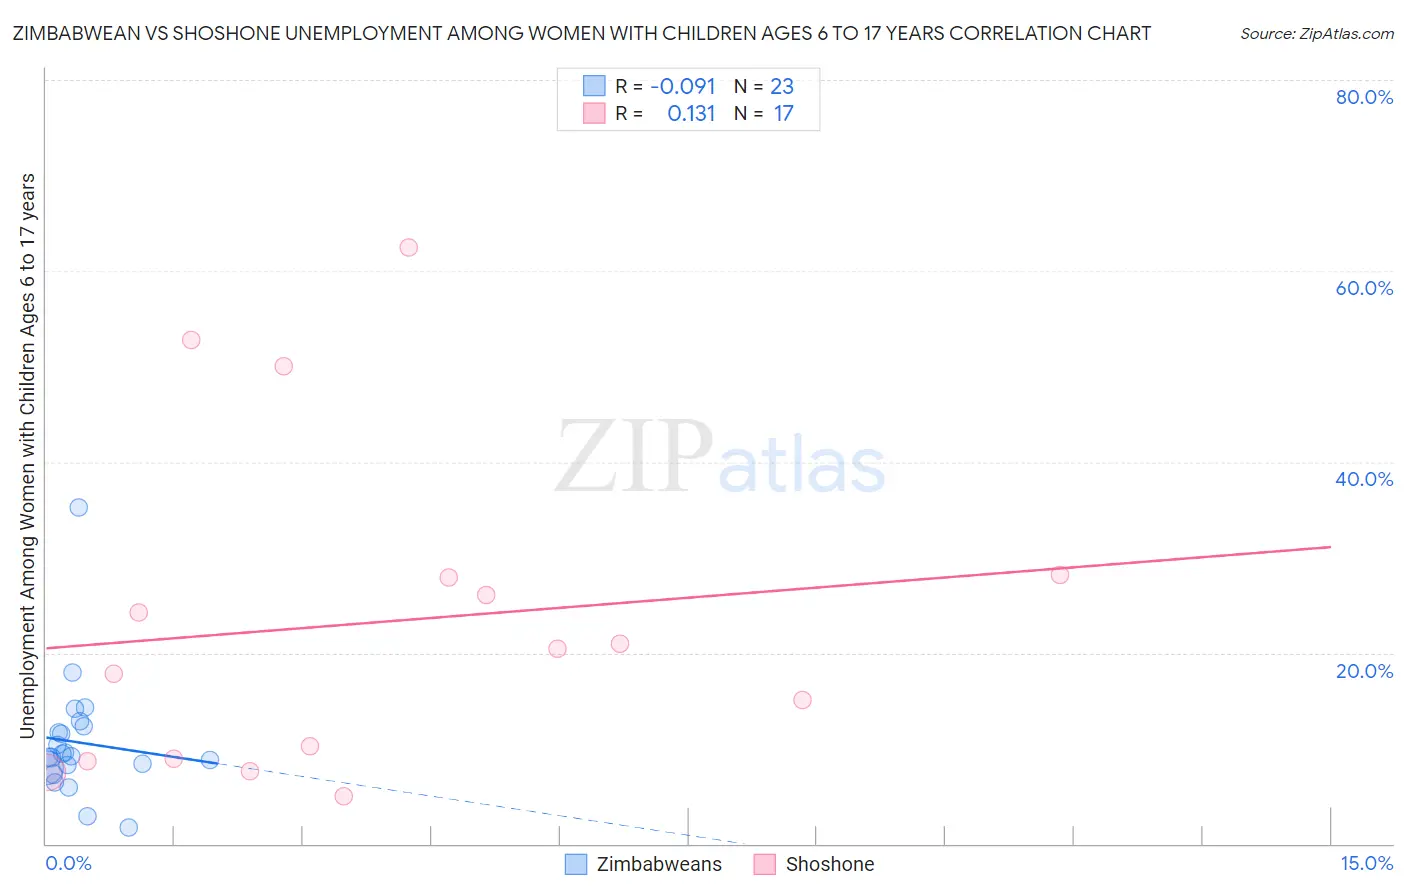 Zimbabwean vs Shoshone Unemployment Among Women with Children Ages 6 to 17 years